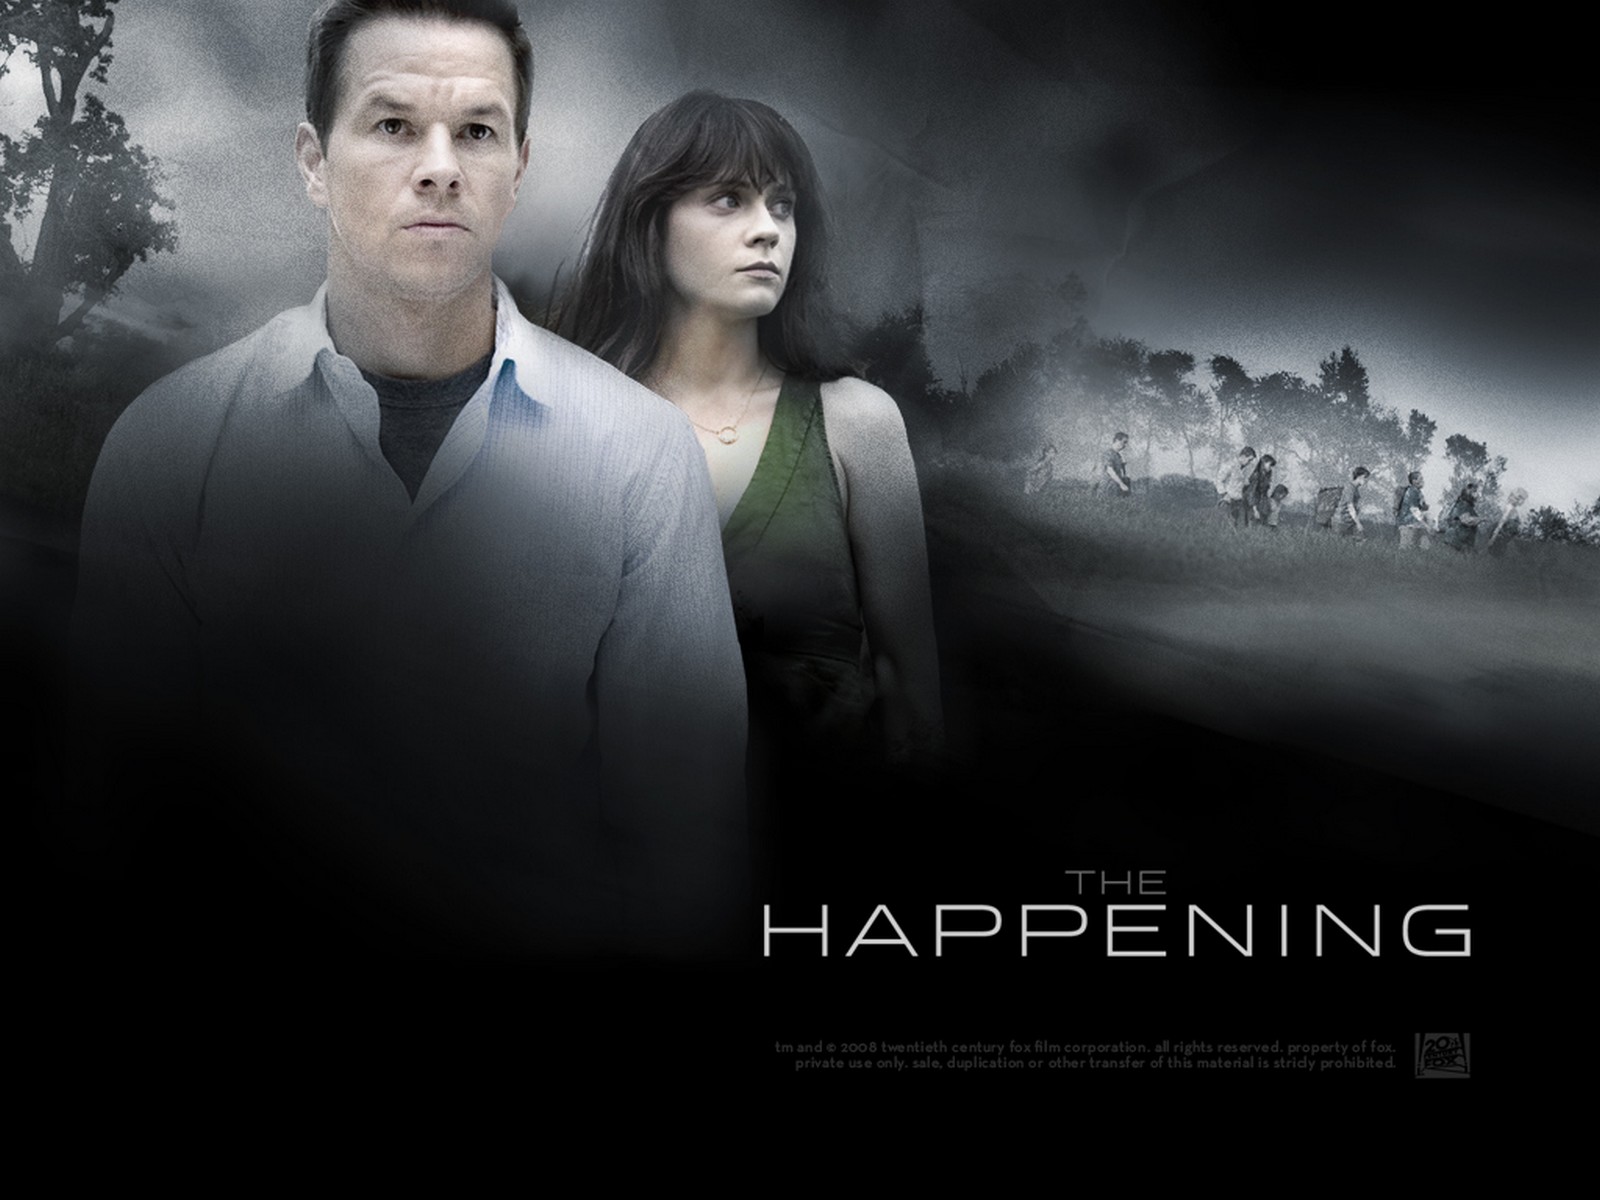 What happening in the world. Явление 2008. Шьямалан явление. Явление / the happening.